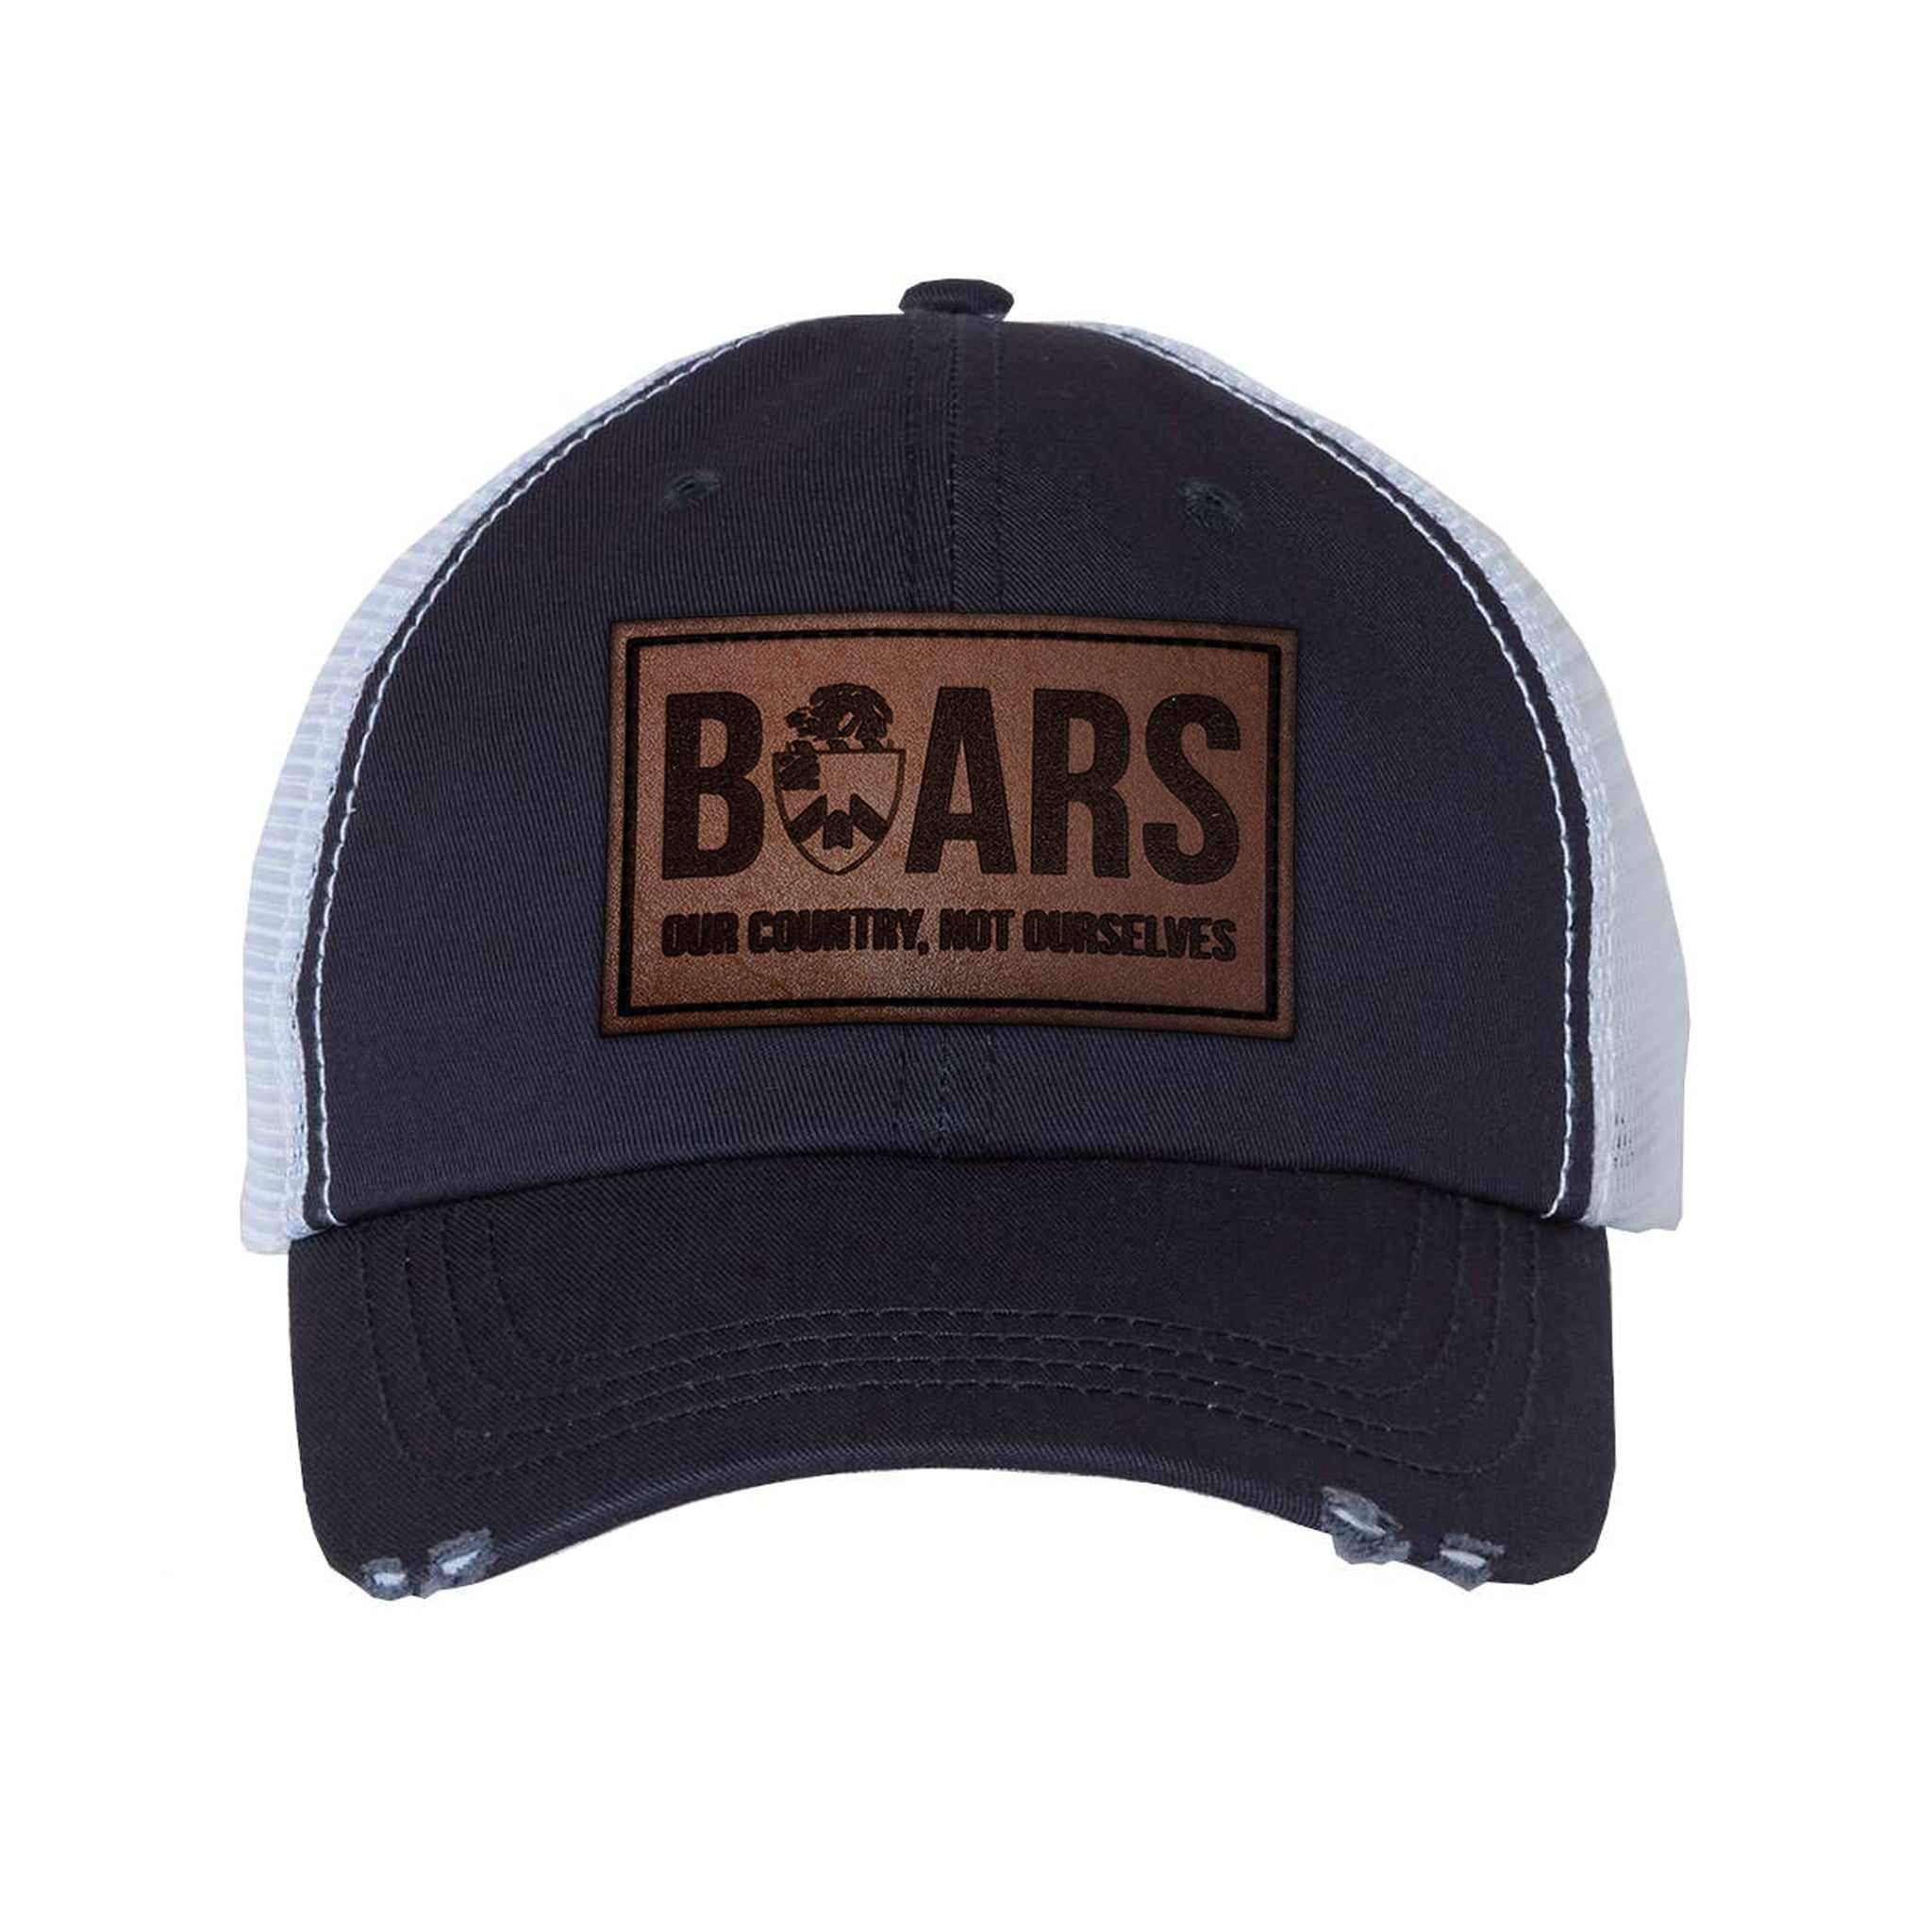 Wild Boars Leather Dad Cap